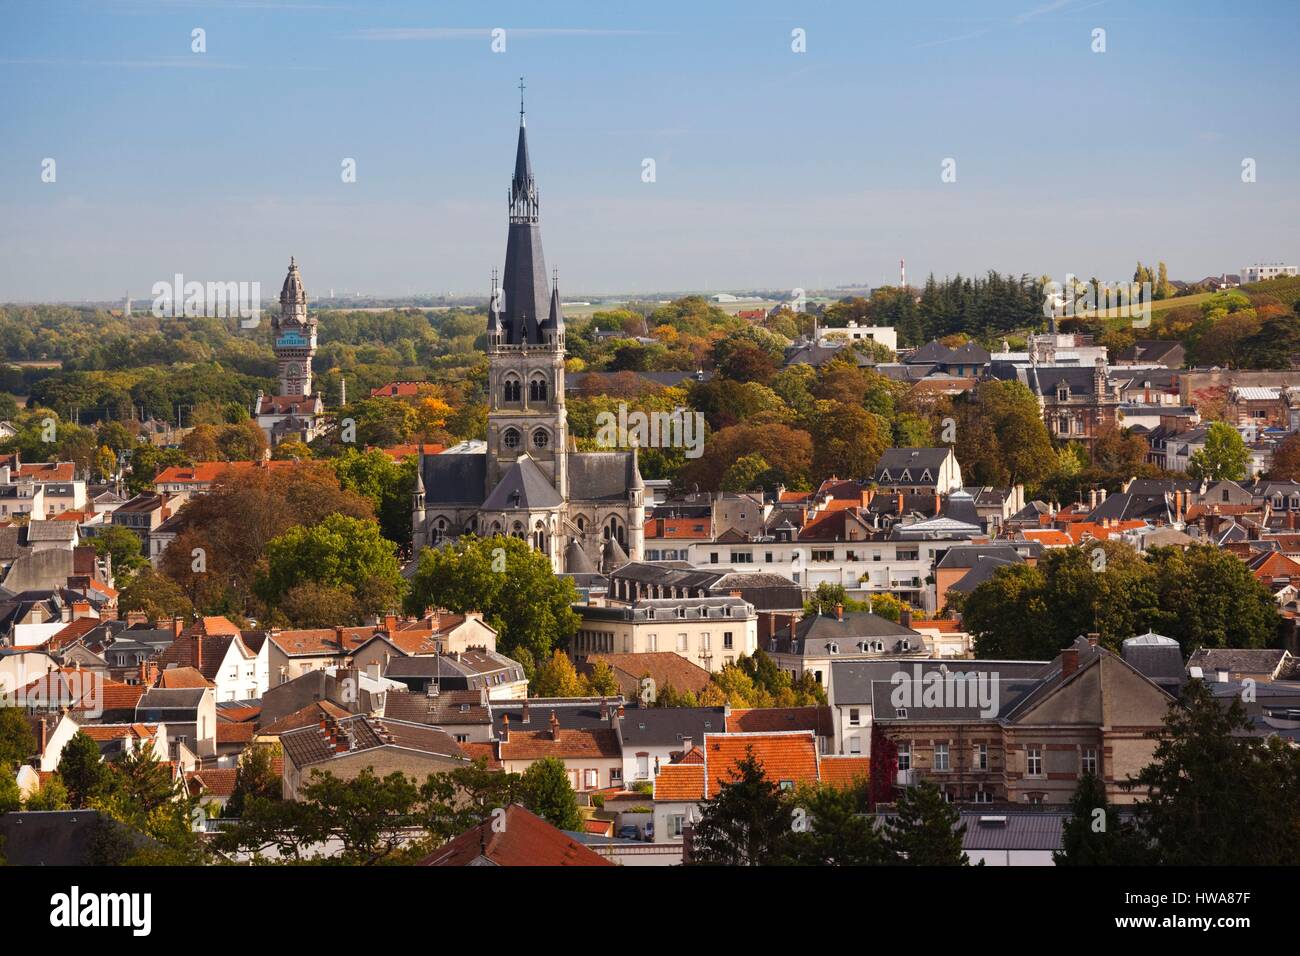 France, Marne, Epernay, town overview with Eglise Notre Dame church Stock Photo